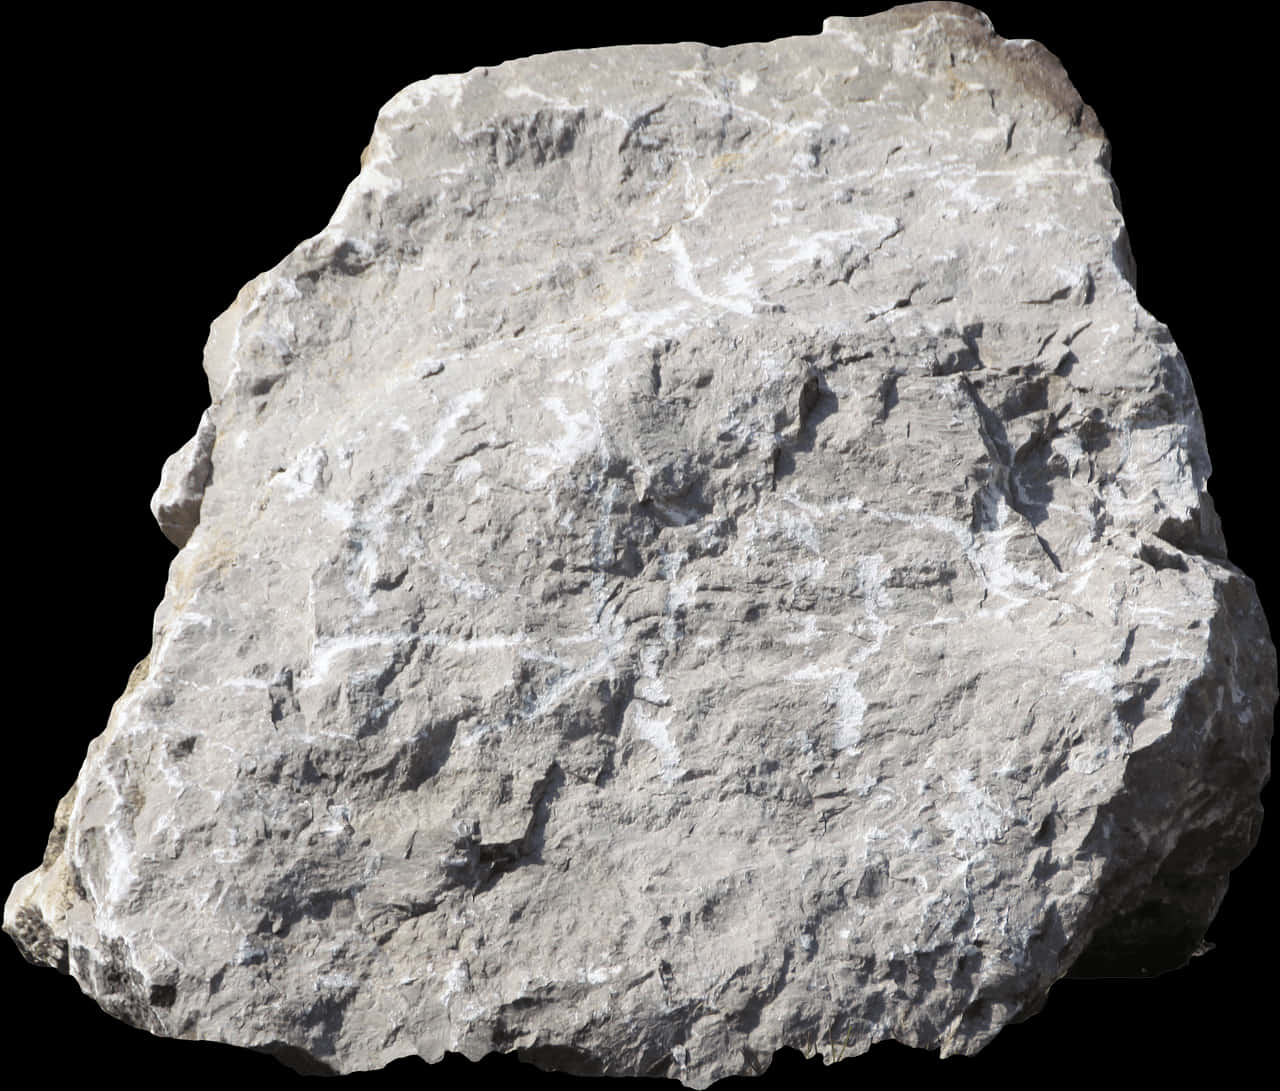 A Large Rock With White Streaks On It